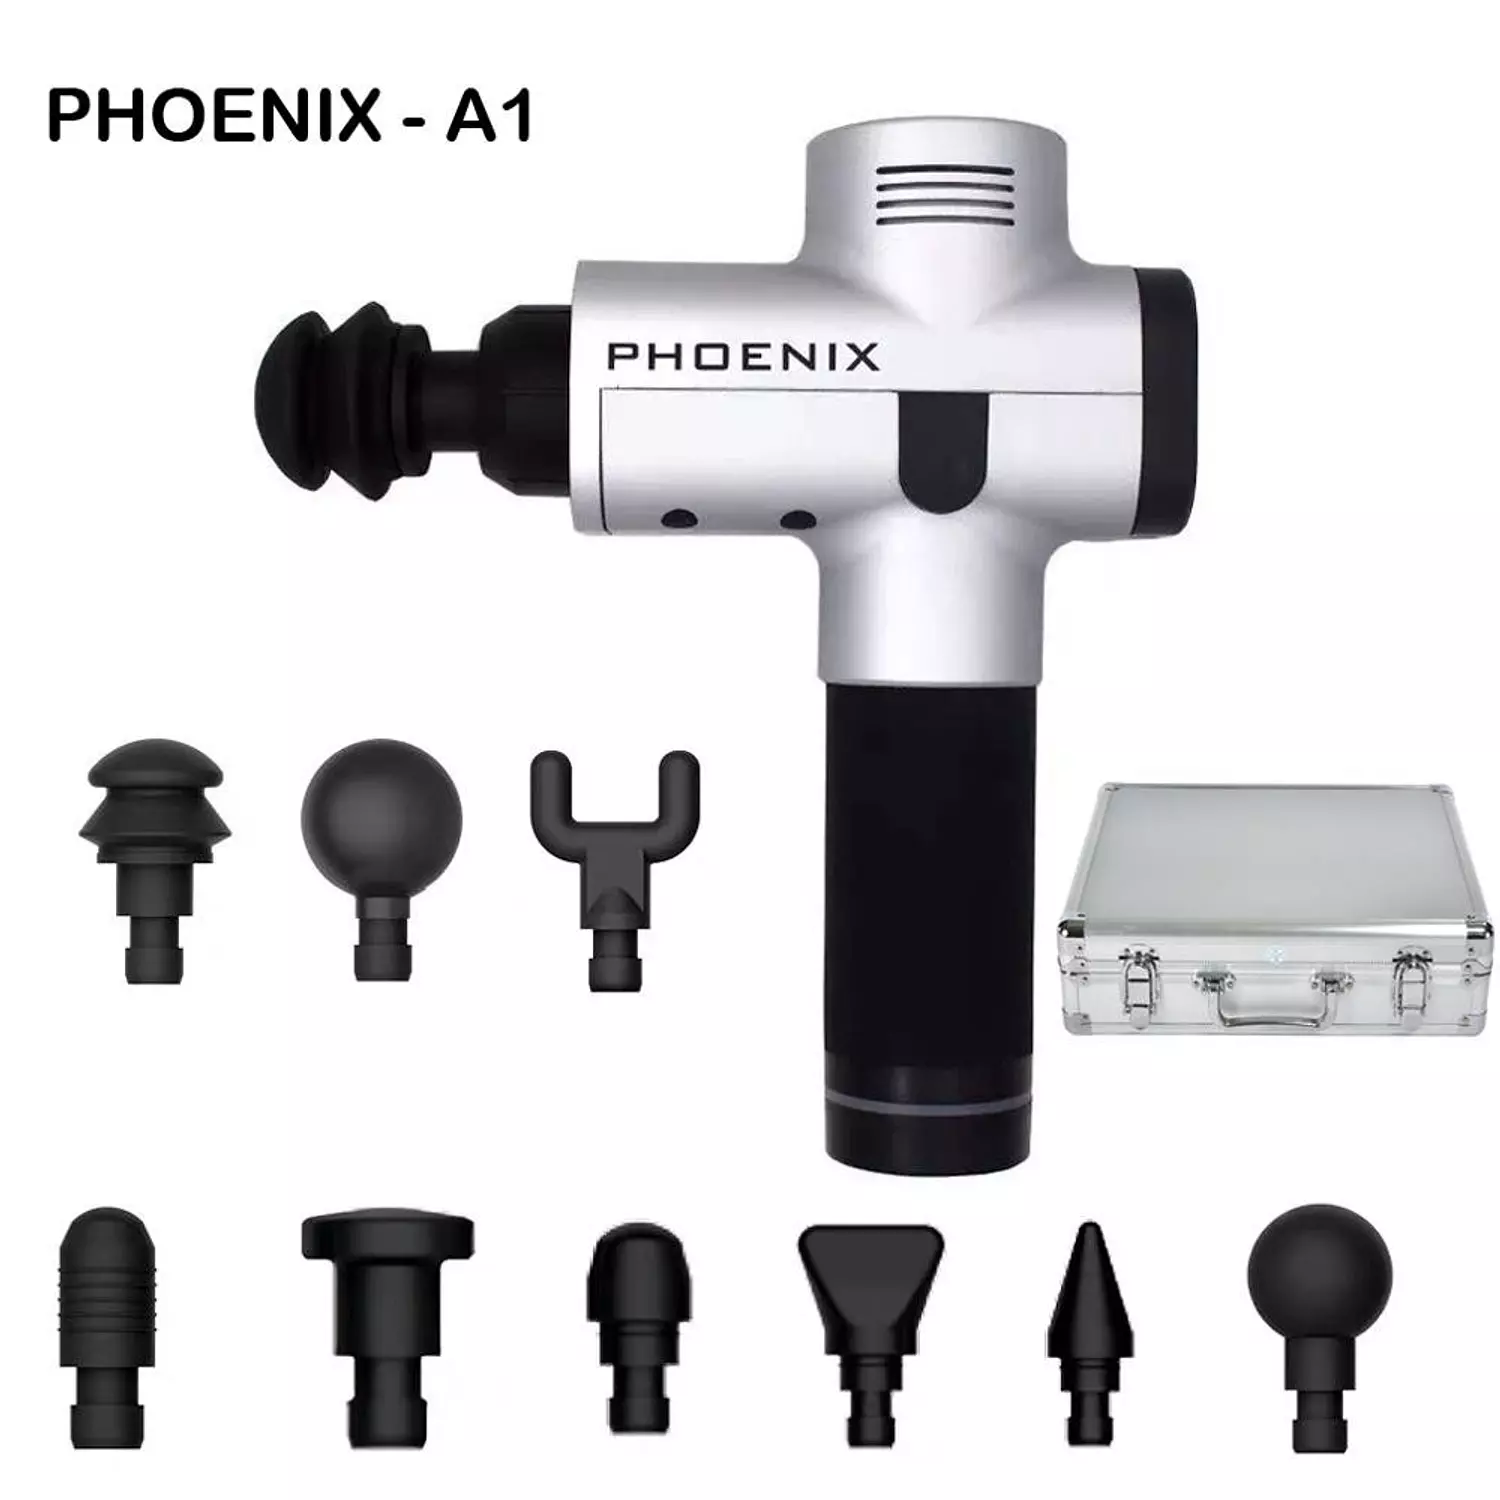 PHOENIX A1 Massage Gun Muscle Relaxation Deep Tissue Massager Dynamic Therapy Vibrator Shaping Pain Relief Back Foot Massager hover image